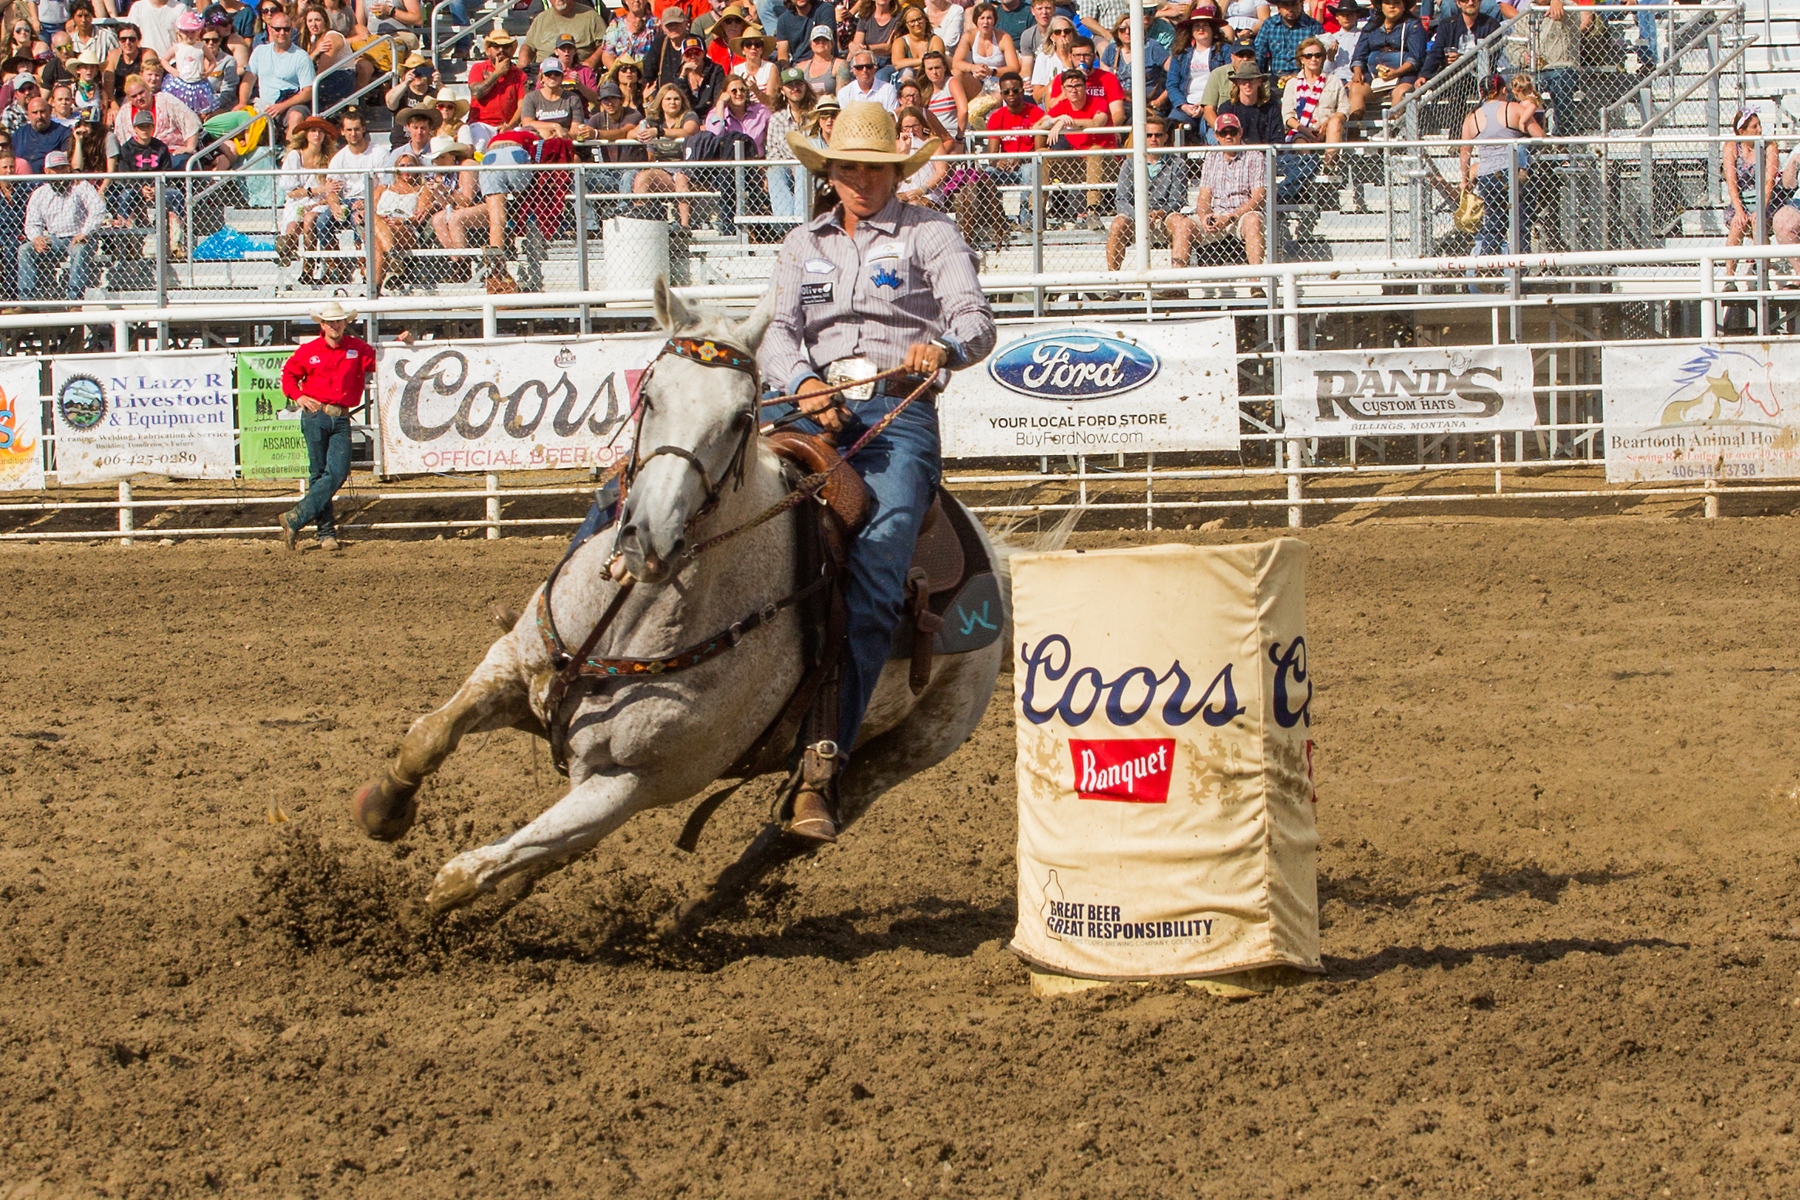 Barrel racing at Home of Champions Rodeo, Red Lodge, MT, July 4, 2021.  Click for next photo.